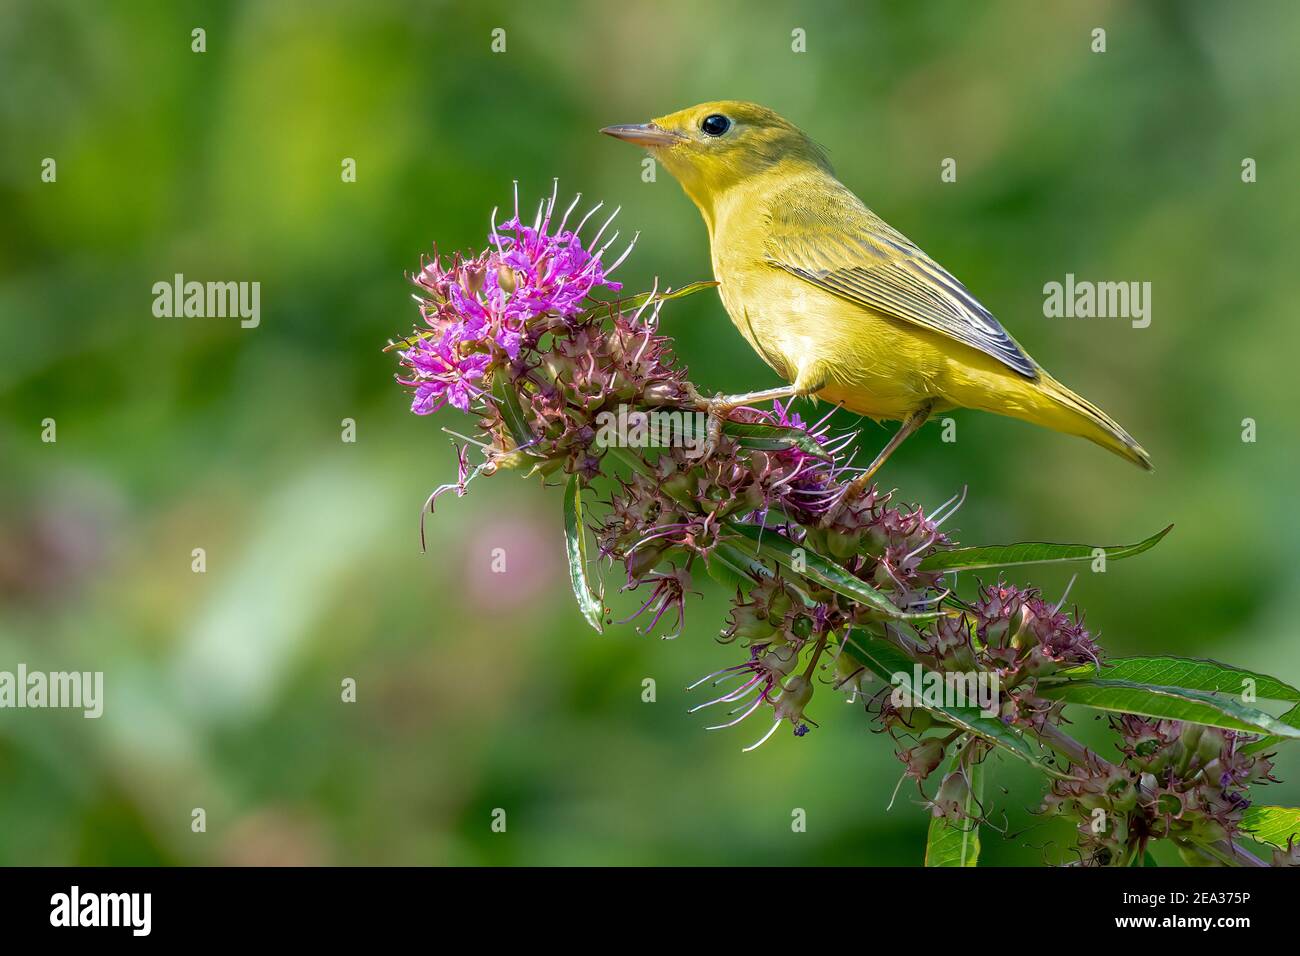 Yellow Warbler perched on a branch during spring migration Stock Photo